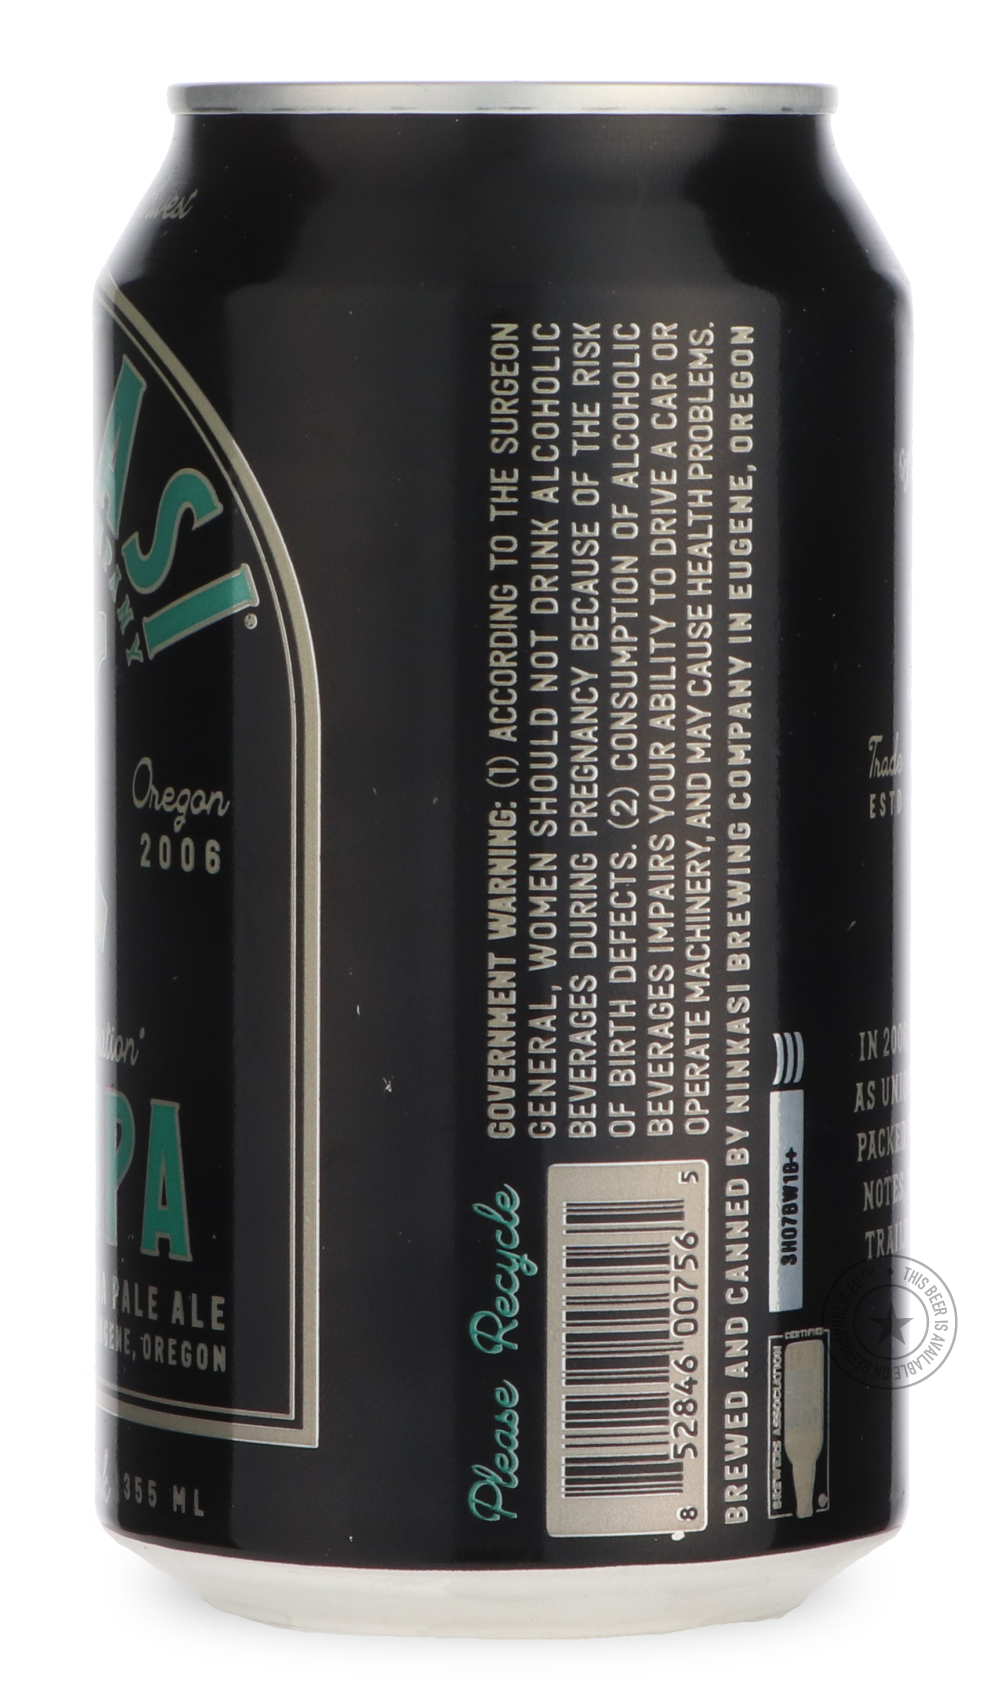 -Ninkasi- Total Domination-IPA- Only @ Beer Republic - The best online beer store for American & Canadian craft beer - Buy beer online from the USA and Canada - Bier online kopen - Amerikaans bier kopen - Craft beer store - Craft beer kopen - Amerikanisch bier kaufen - Bier online kaufen - Acheter biere online - IPA - Stout - Porter - New England IPA - Hazy IPA - Imperial Stout - Barrel Aged - Barrel Aged Imperial Stout - Brown - Dark beer - Blond - Blonde - Pilsner - Lager - Wheat - Weizen - Amber - Barley